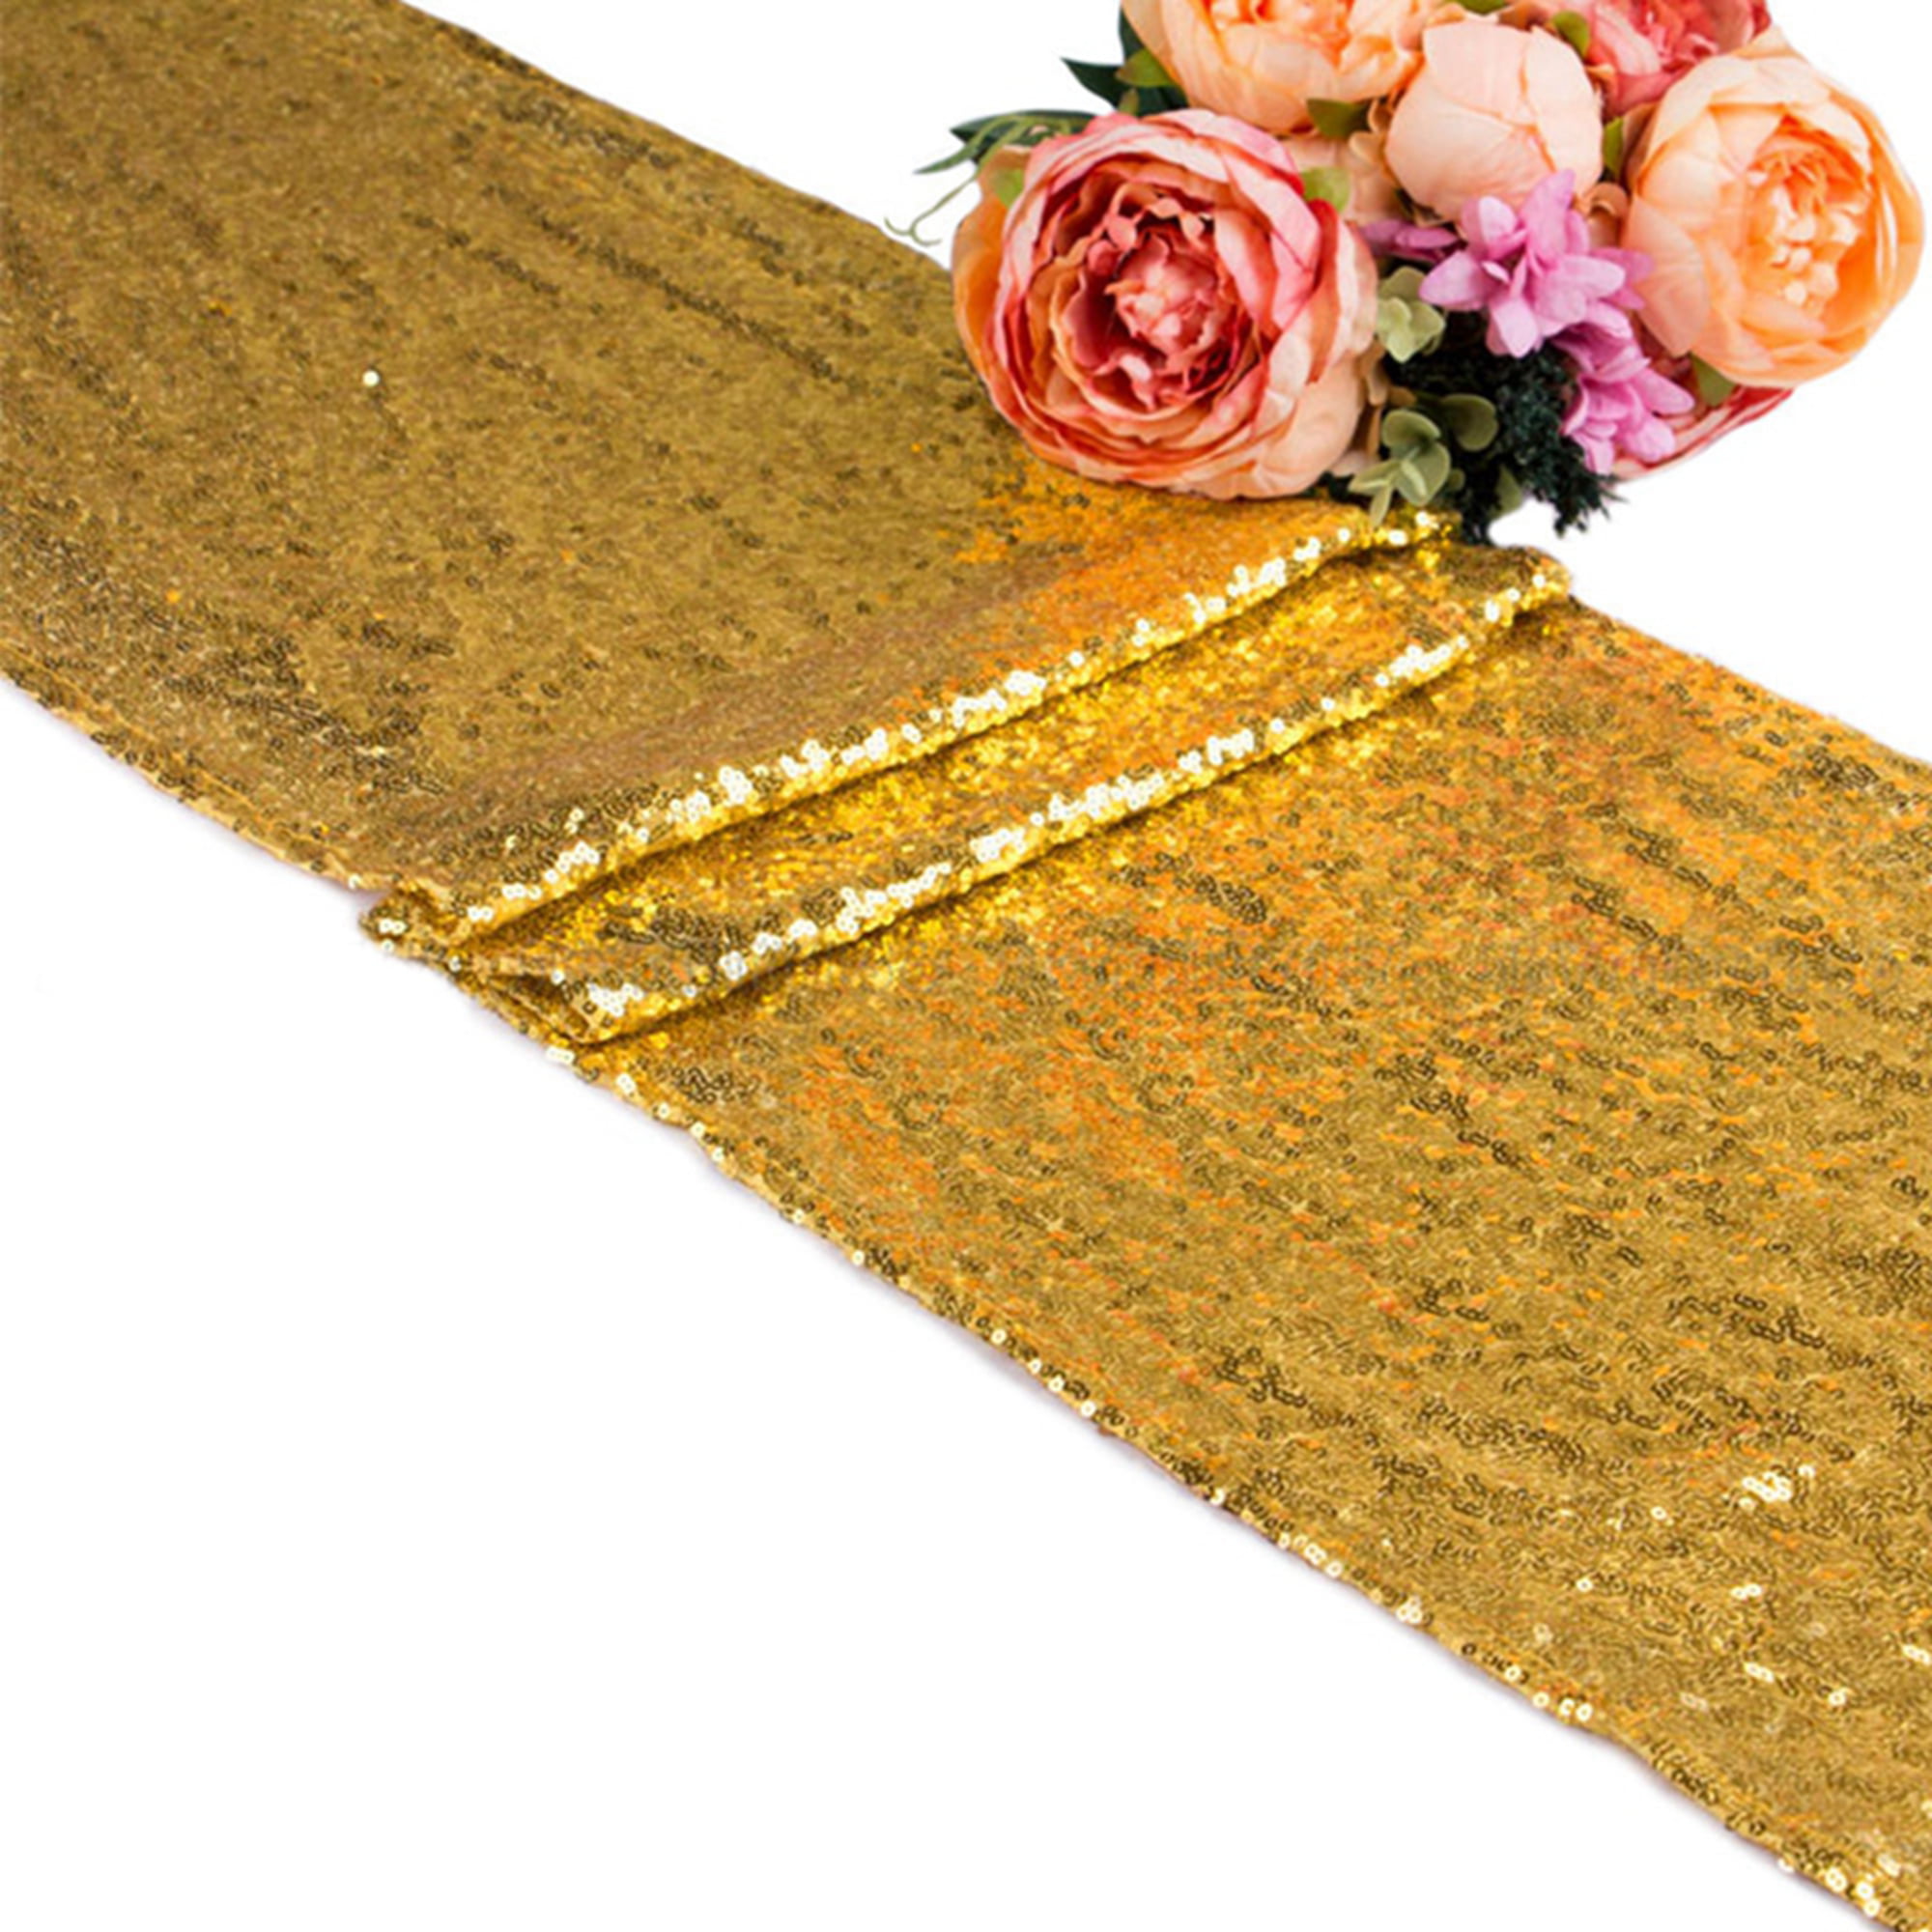 Gold Sequin Table Runner 14x80 inch Glitter Fabric for Wedding Banquet Party Birthday Summer Holiday Decoration 2 Pack